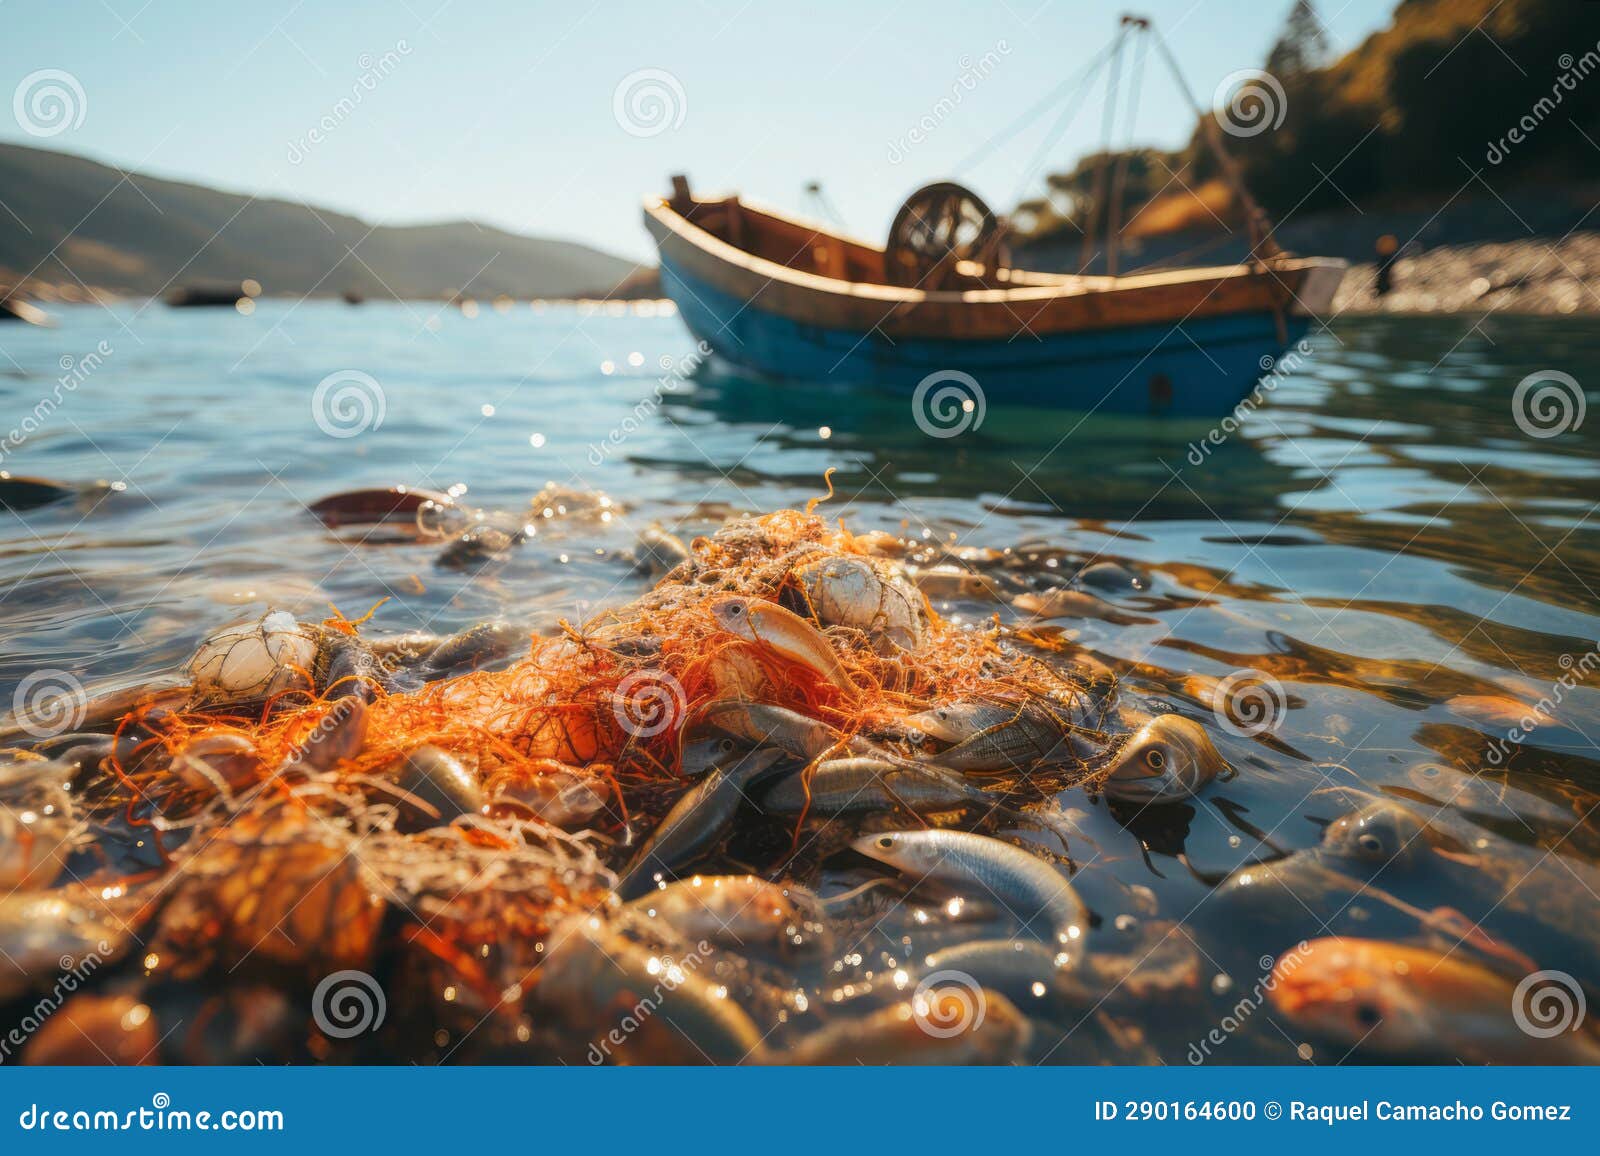 https://thumbs.dreamstime.com/z/fishing-net-several-fishes-near-small-boat-some-fish-caught-foreground-background-water-290164600.jpg